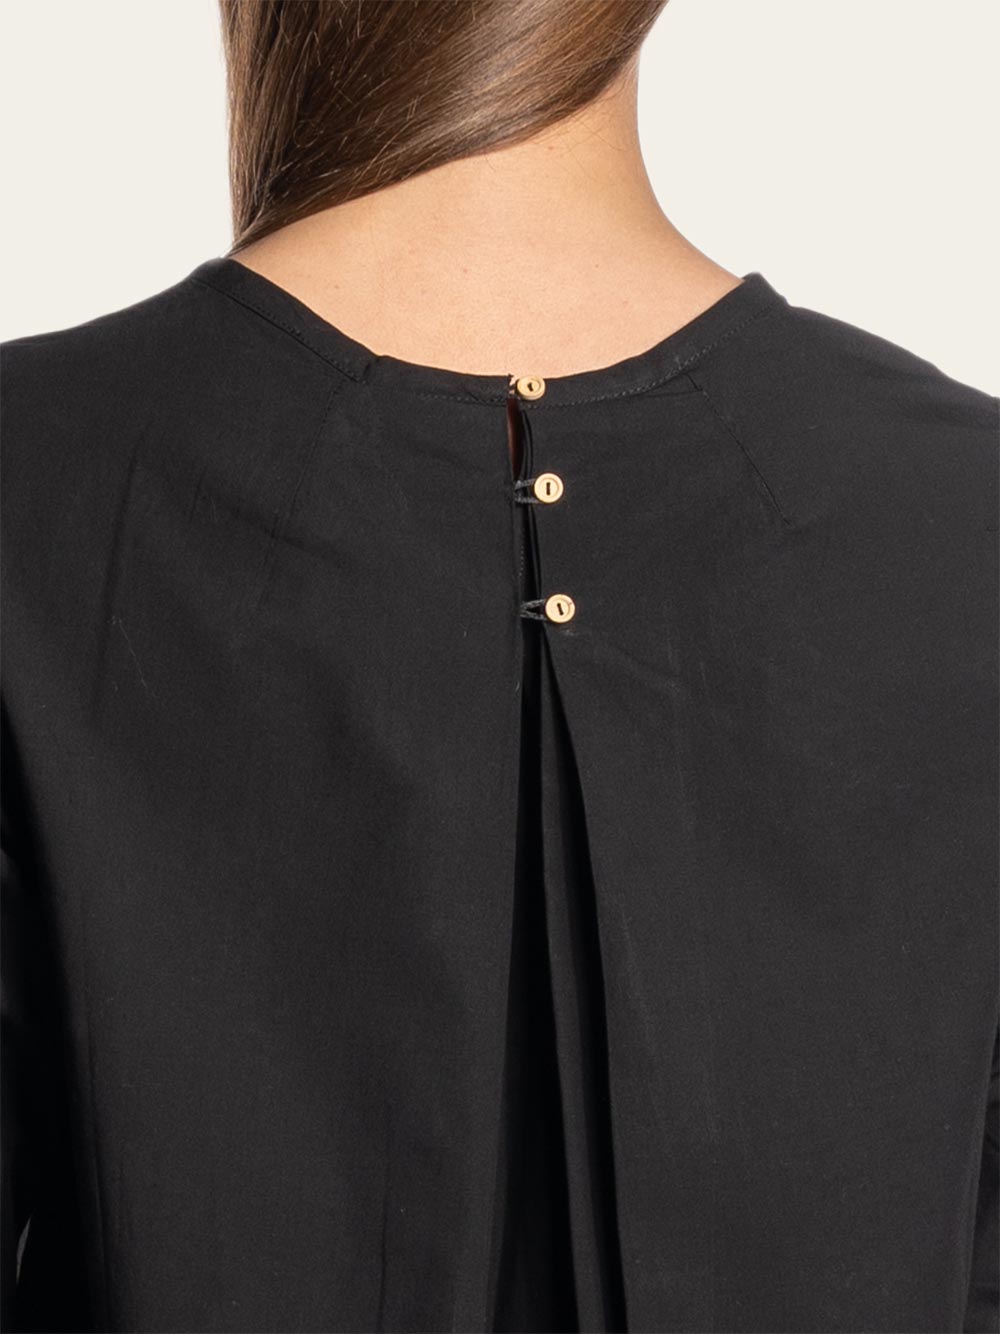 Organic cotton shirt with pleats and straight three-quarter sleeves